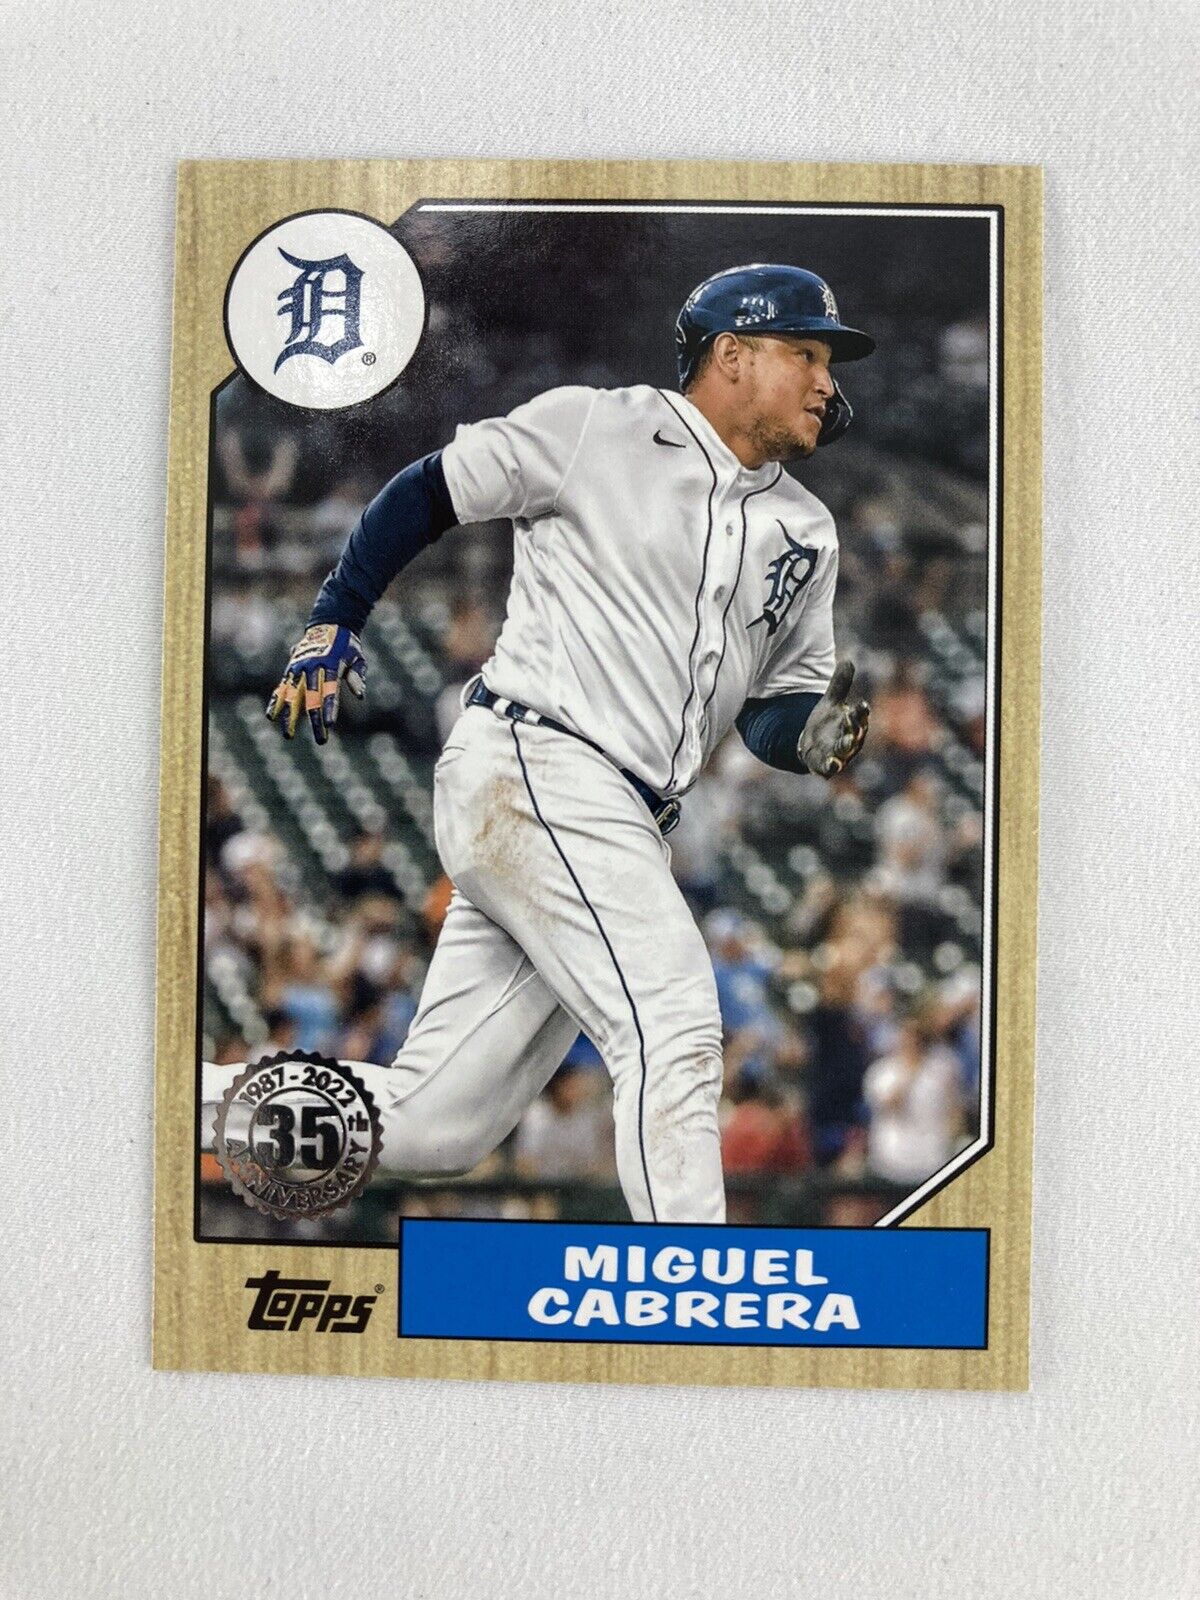 Miguel Cabrera 35th Anniversary 2022 Topps Series 1 Card# T87-83